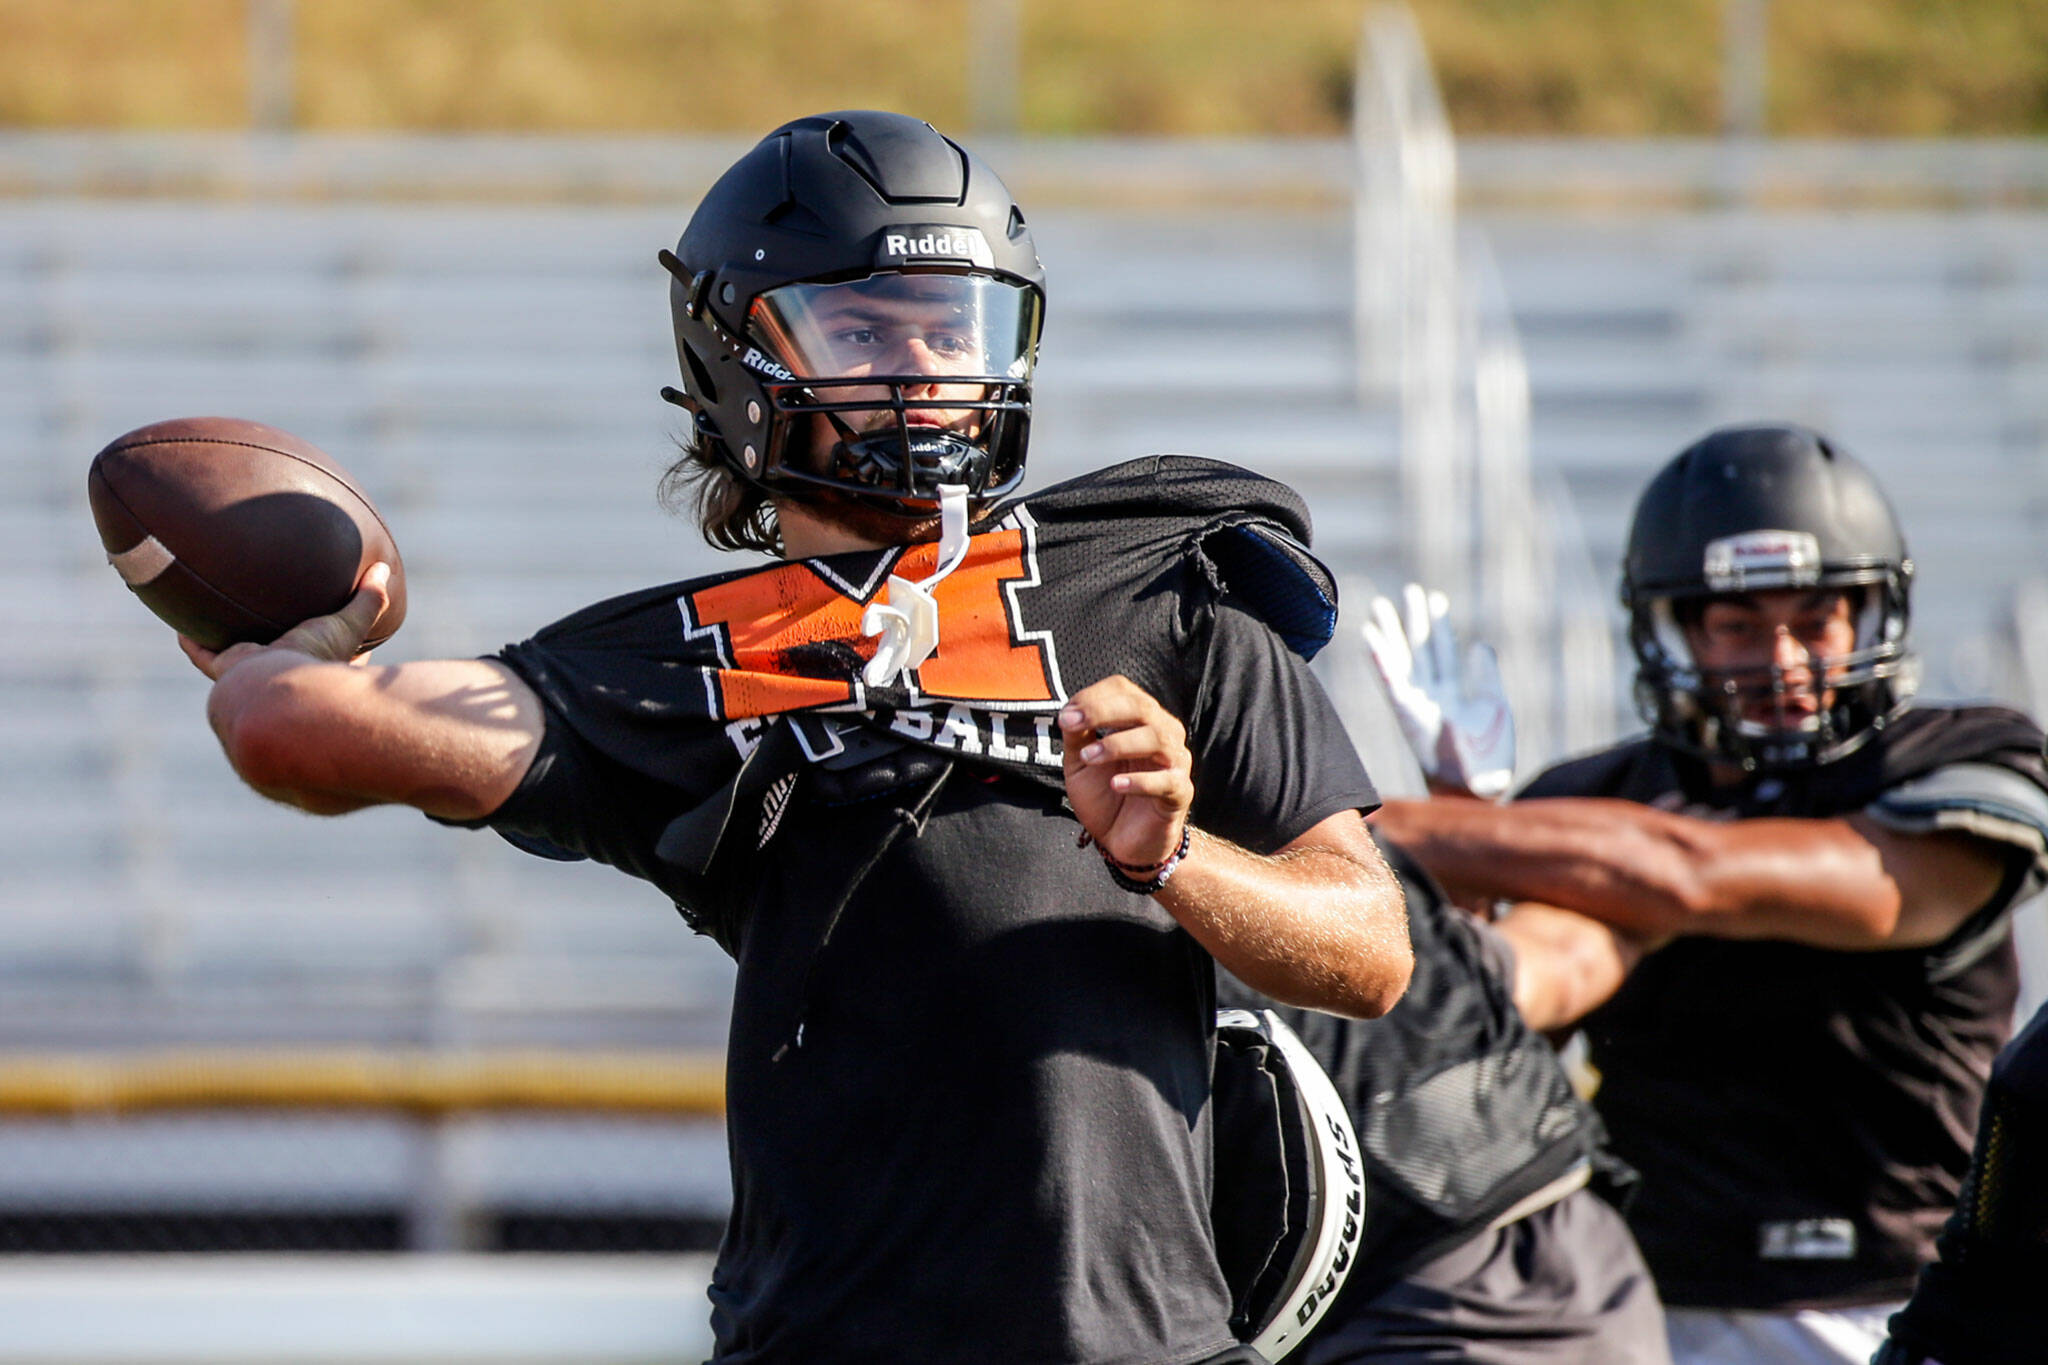 Blake Springer drops back for a pass during practice at Monroe High School on Aug. 30. (Kevin Clark / The Herald)